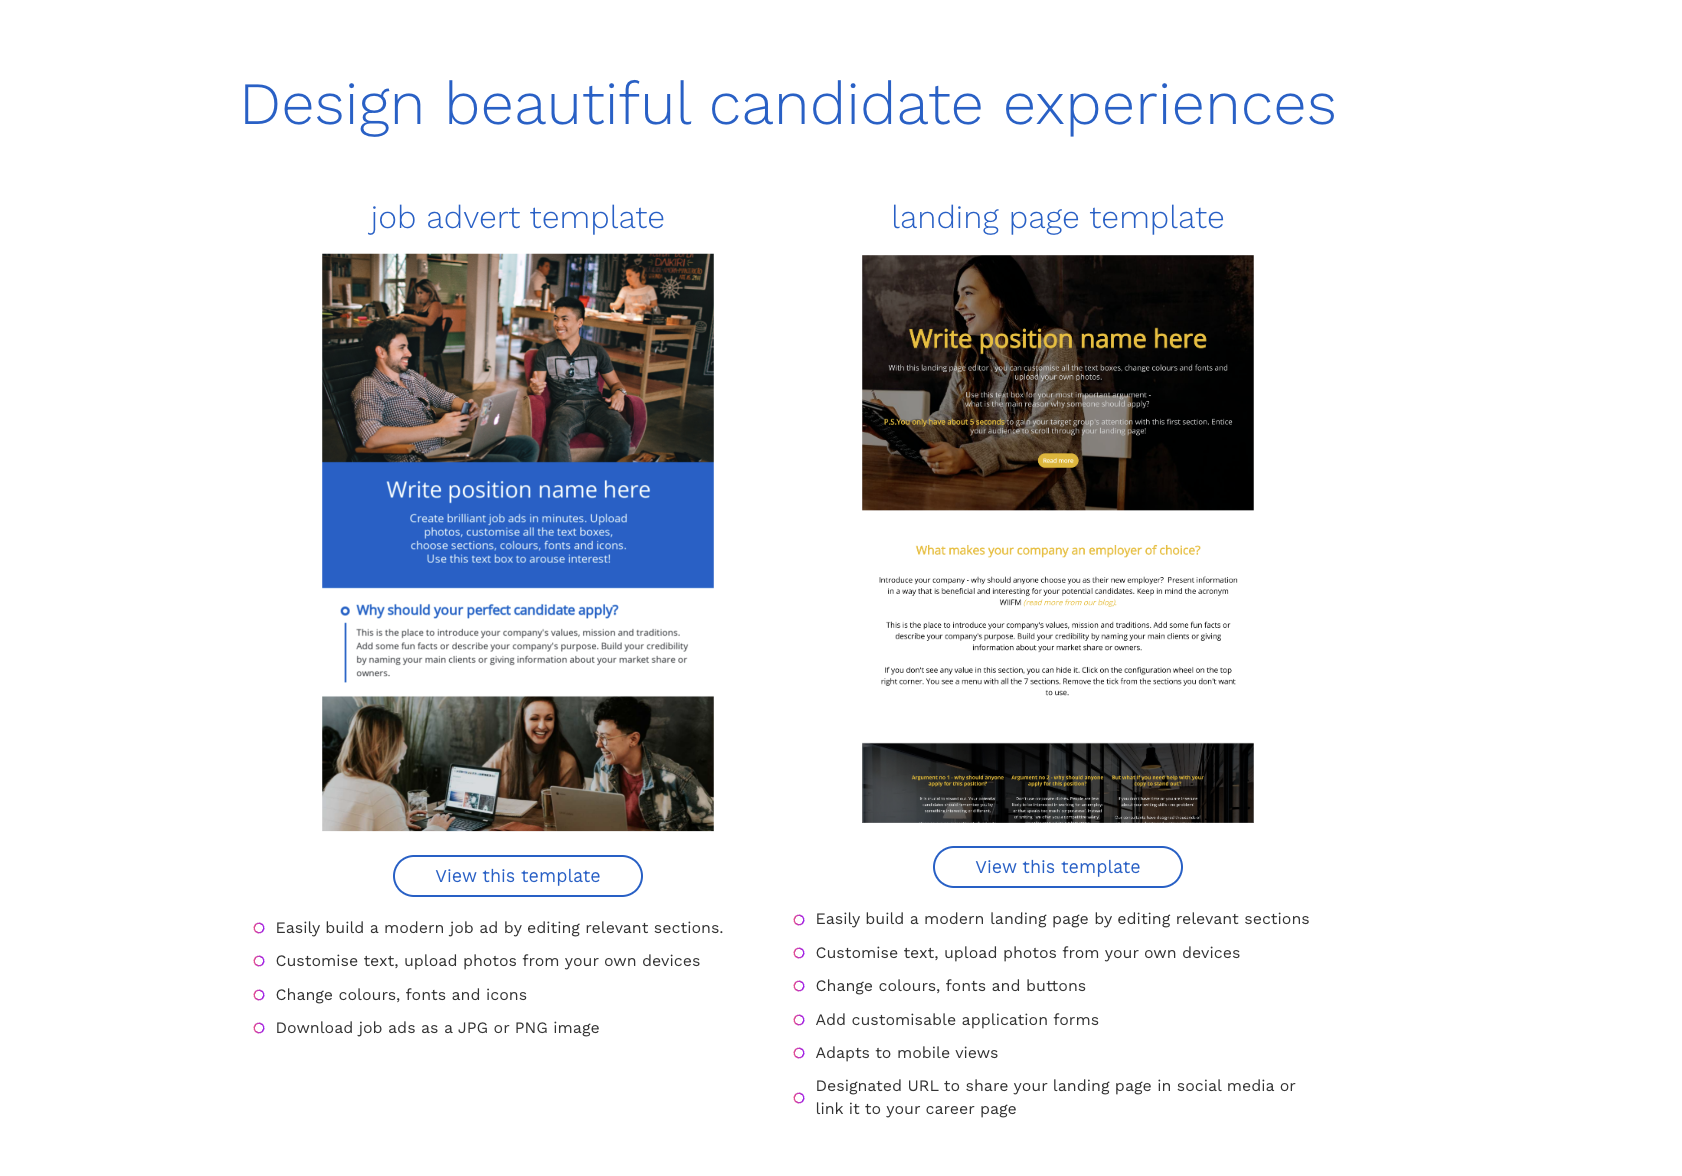 Easy to use design tools to create beautiful job adverts, landing pages and career pages. Now you can do it all without needing any help from designers or developers. Fully customisable. 